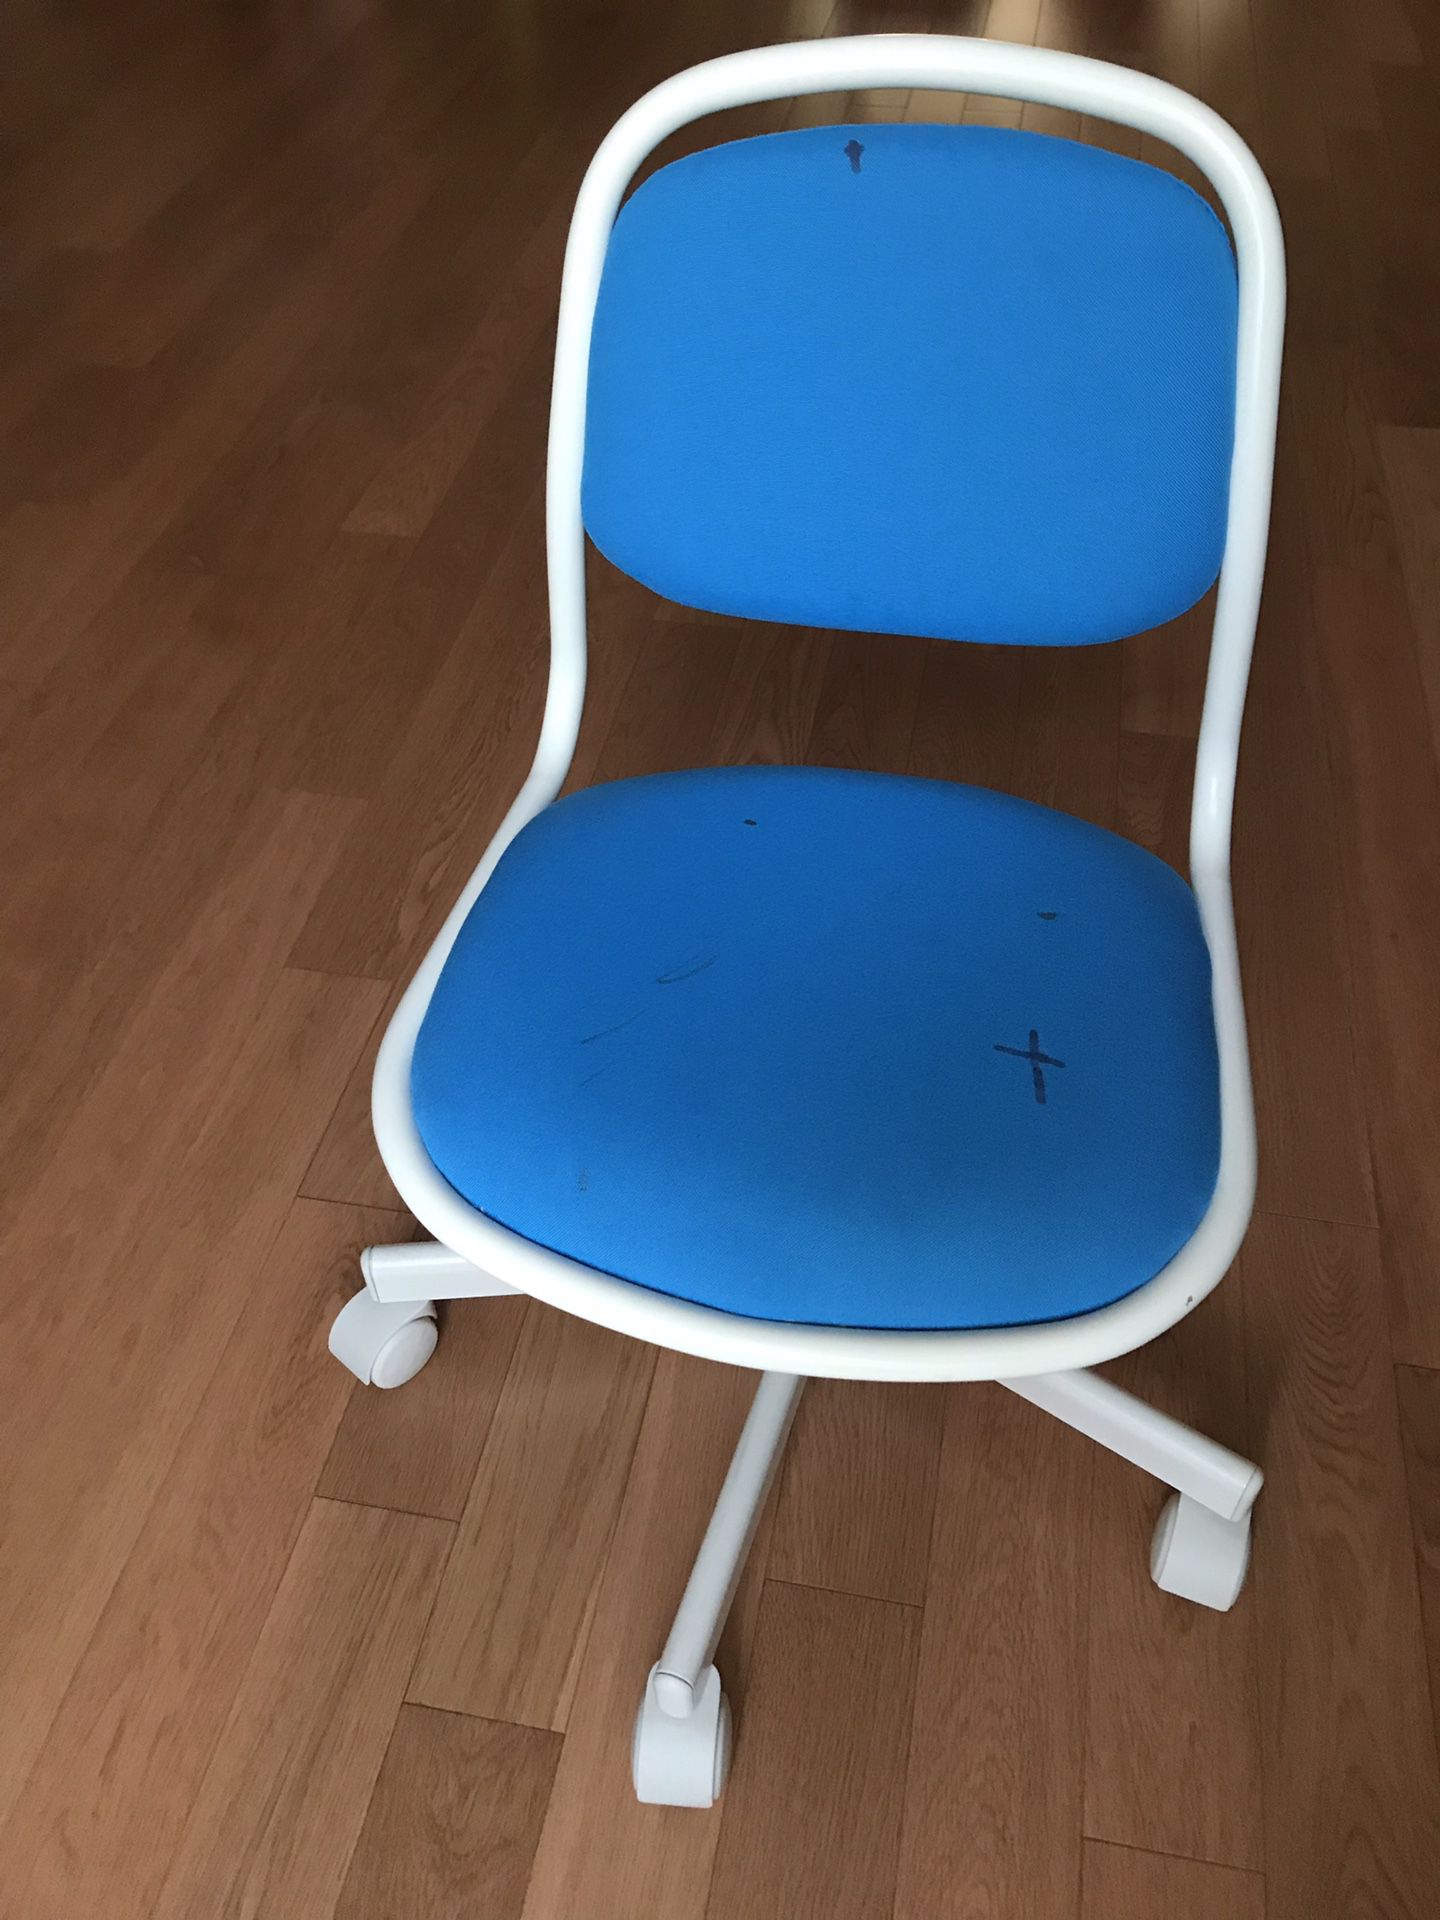 Adjustable children’s desk chair from Ikea (Orfjall)